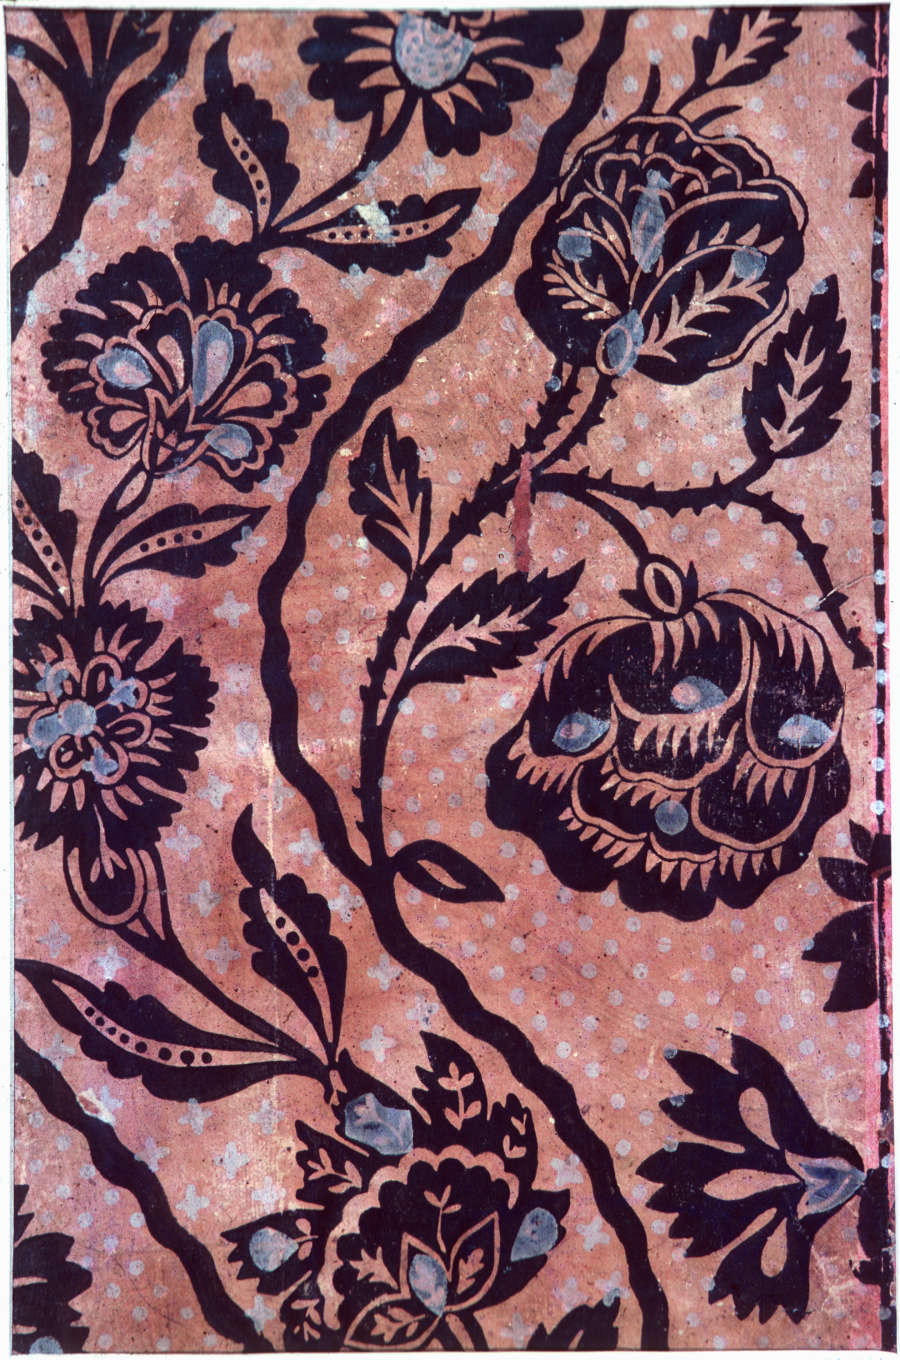 Segment of repetitive floral wallpaper depicting silhouetted chrysanthemums, curved vines and leaves set against a pink and white dotted background; blue accents decorate the motifs.